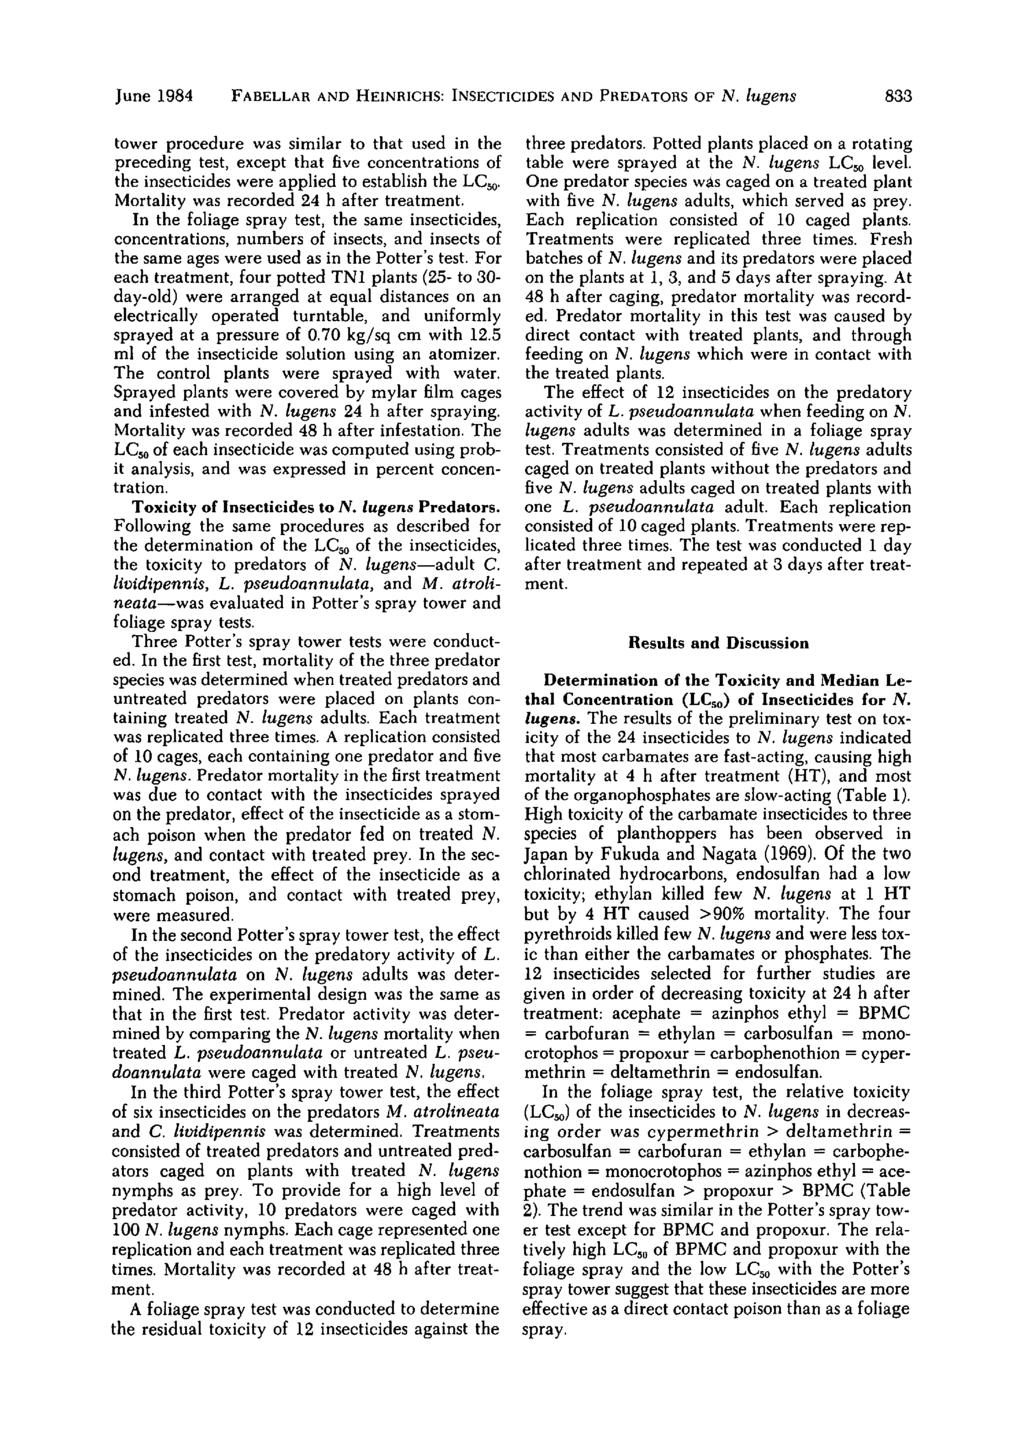 June 1984 FA BELLAR AND HEINRICHS: INSECTICIDES AND PREDATORS OF N.